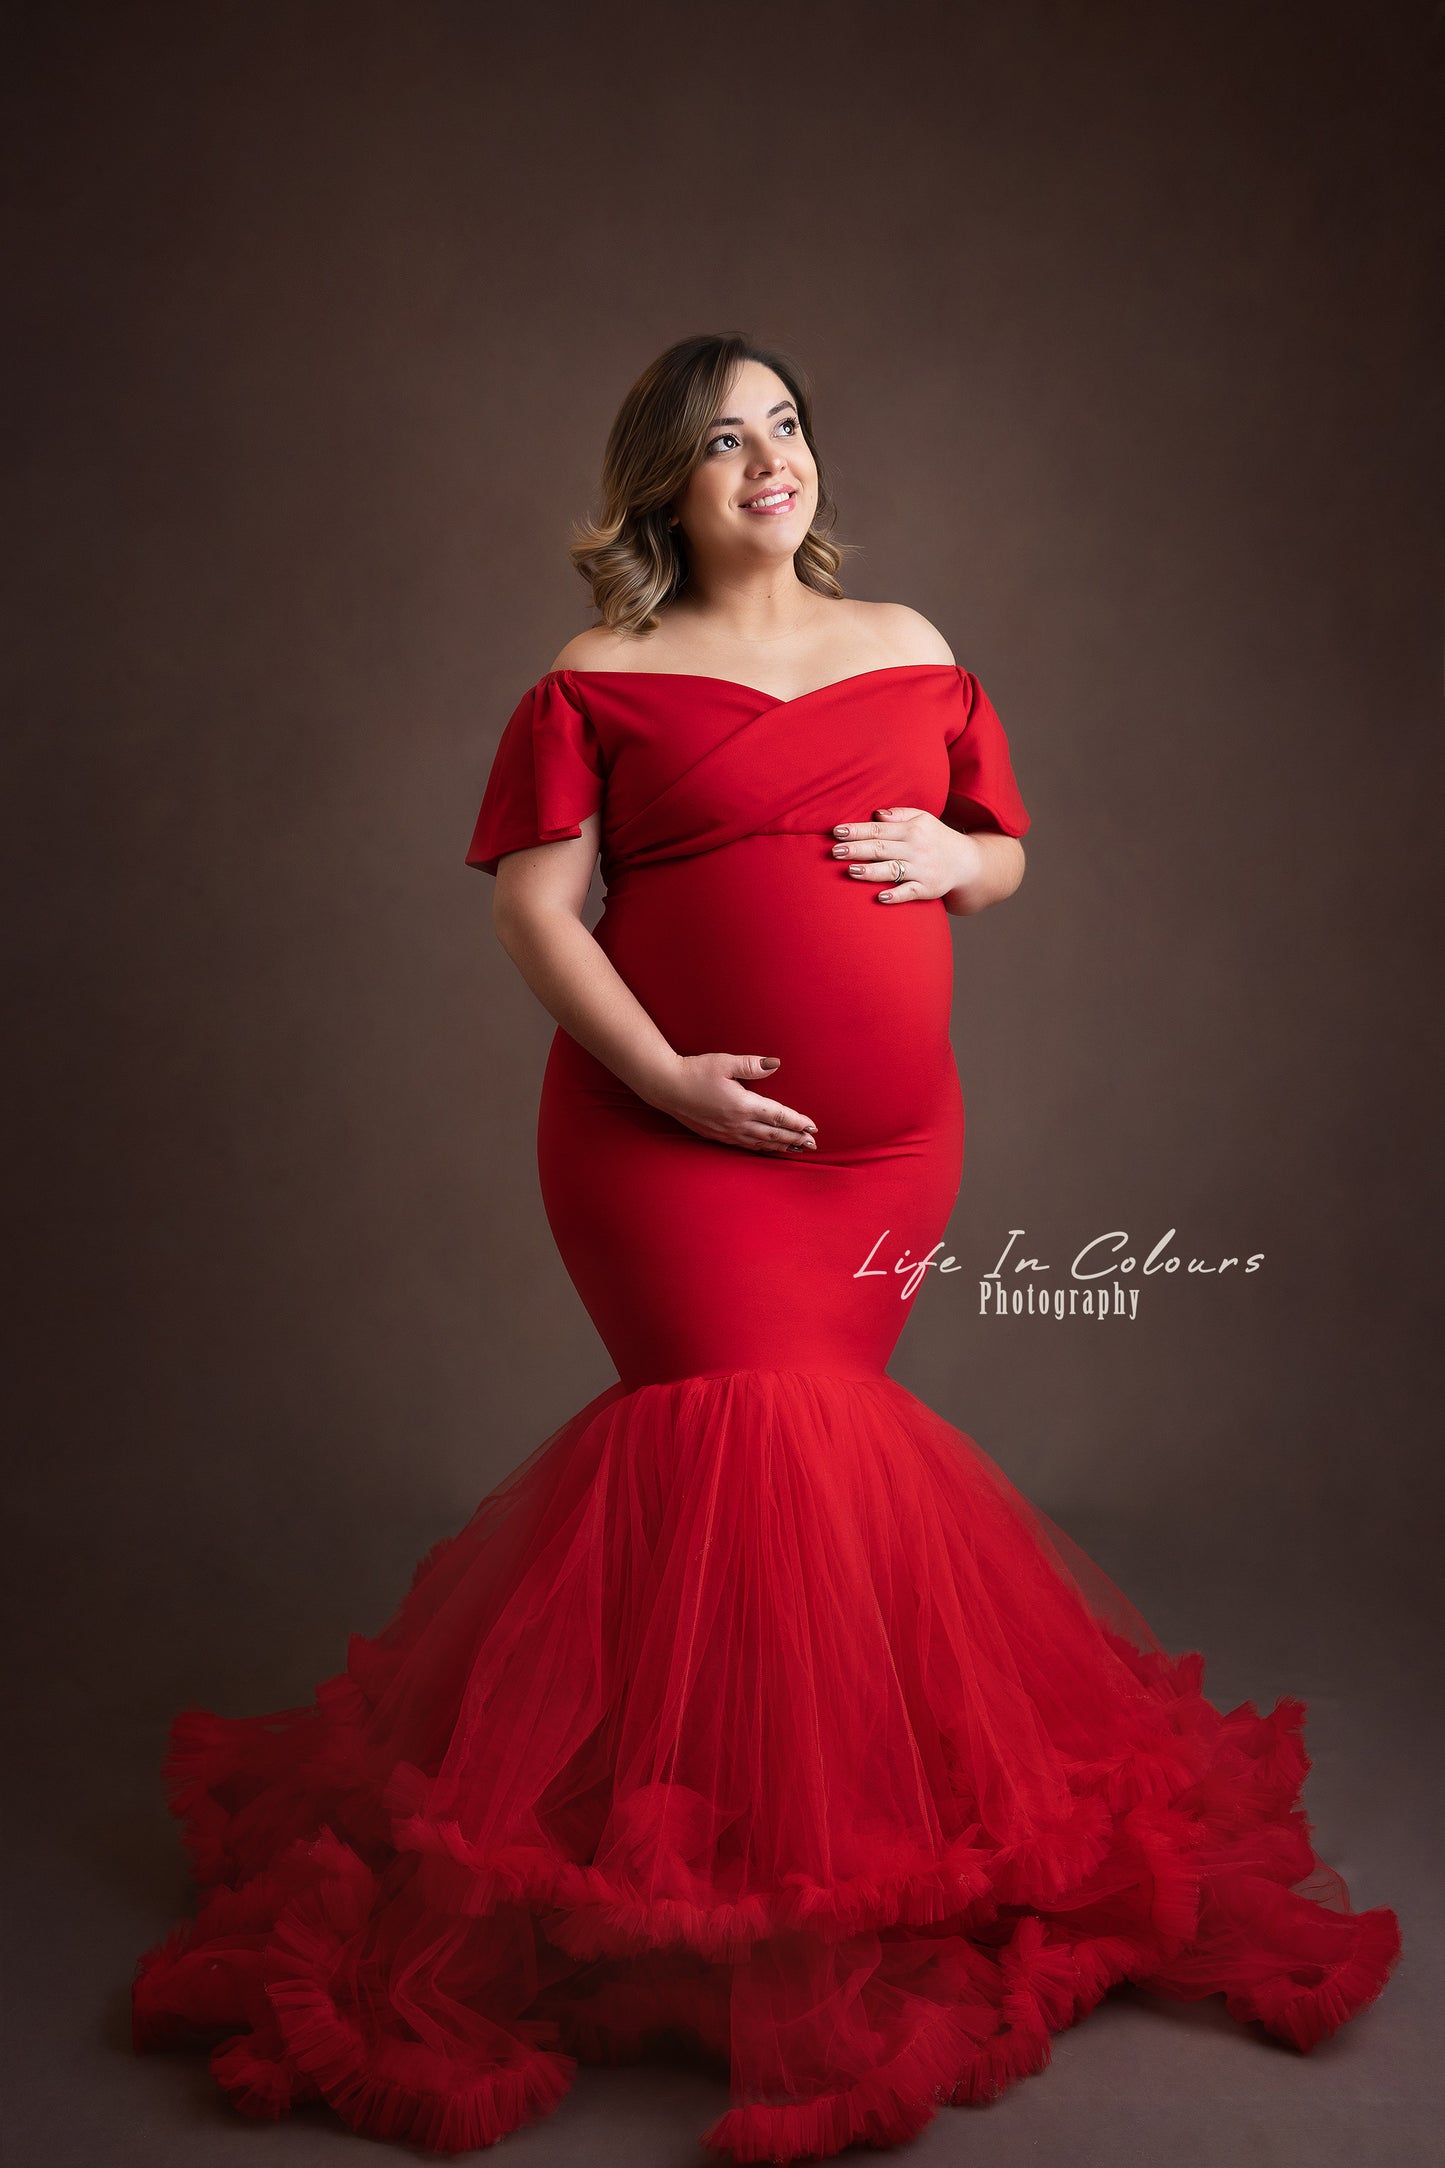 FOR HIRE / RENT tulle and elastic material Maternity Photoshoot Event Dress " Royal Lady" in Red